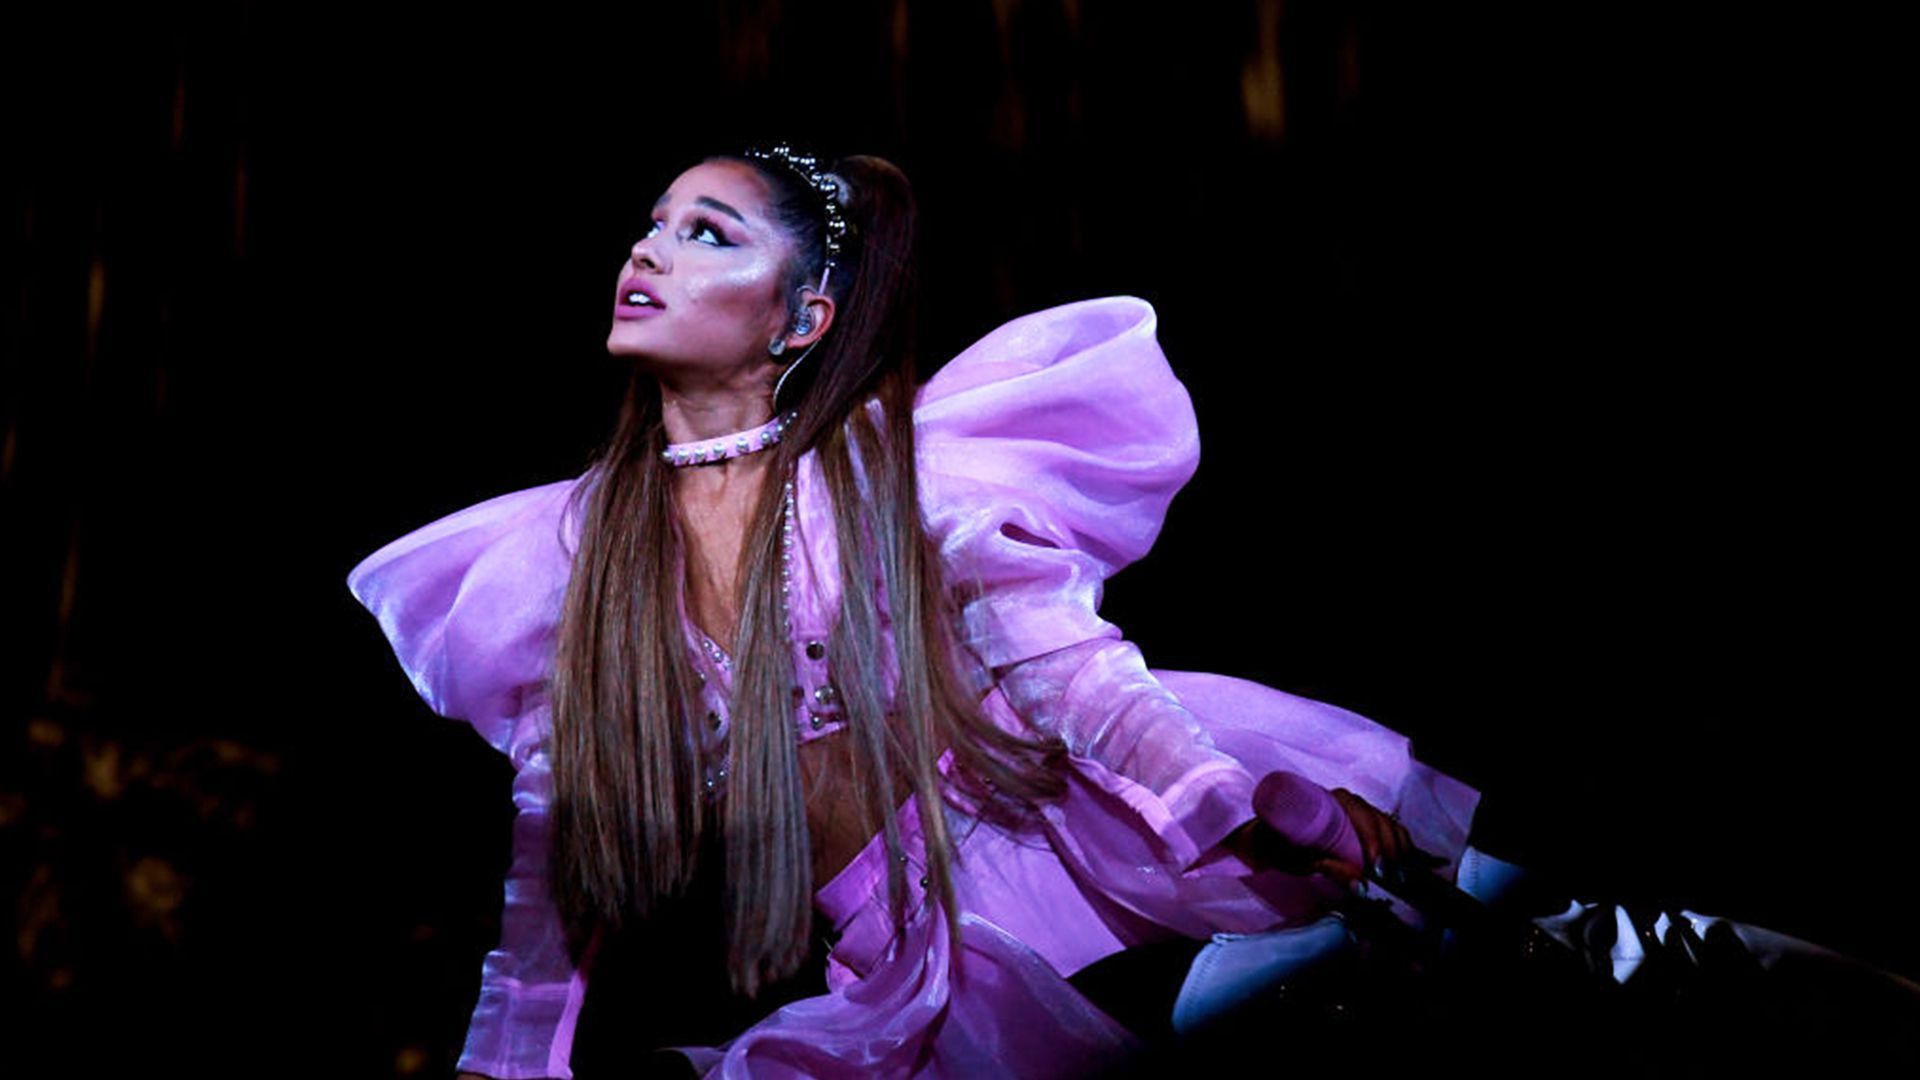 Ariana Grande has released a statement after breaking down on stage